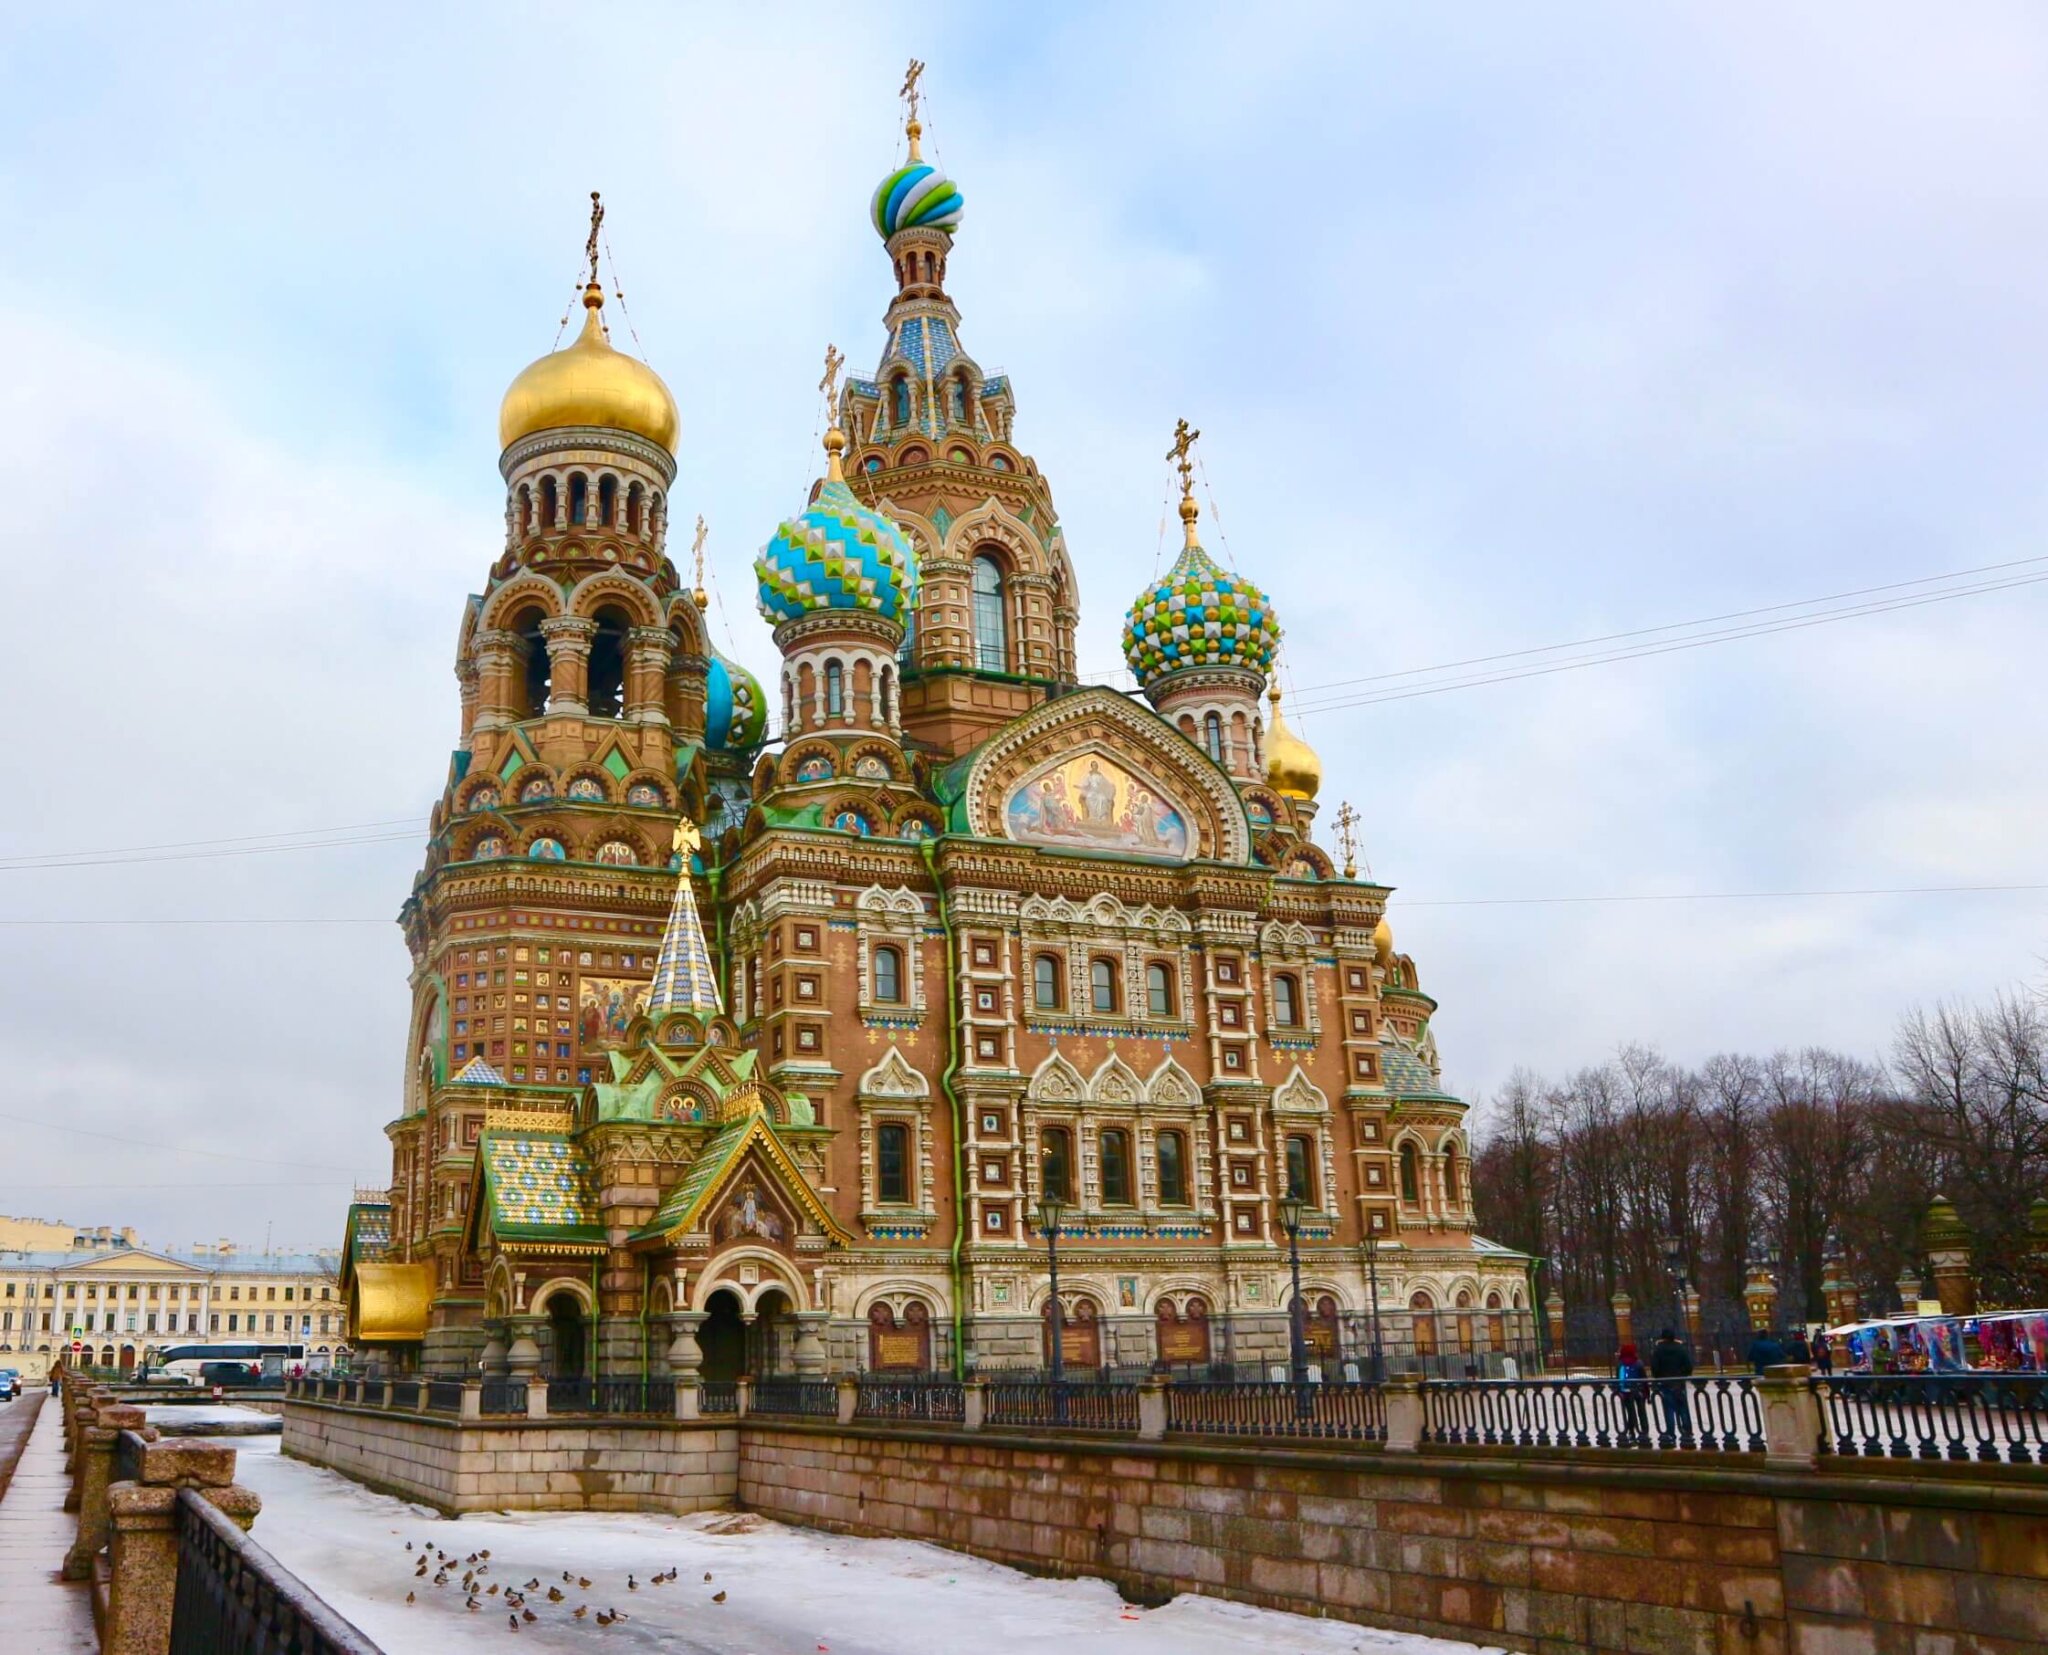 ST PETERSBURG RUSSIA ATTRACTIONS: EVERYTHING TO DO IN ST. PETERSBURG